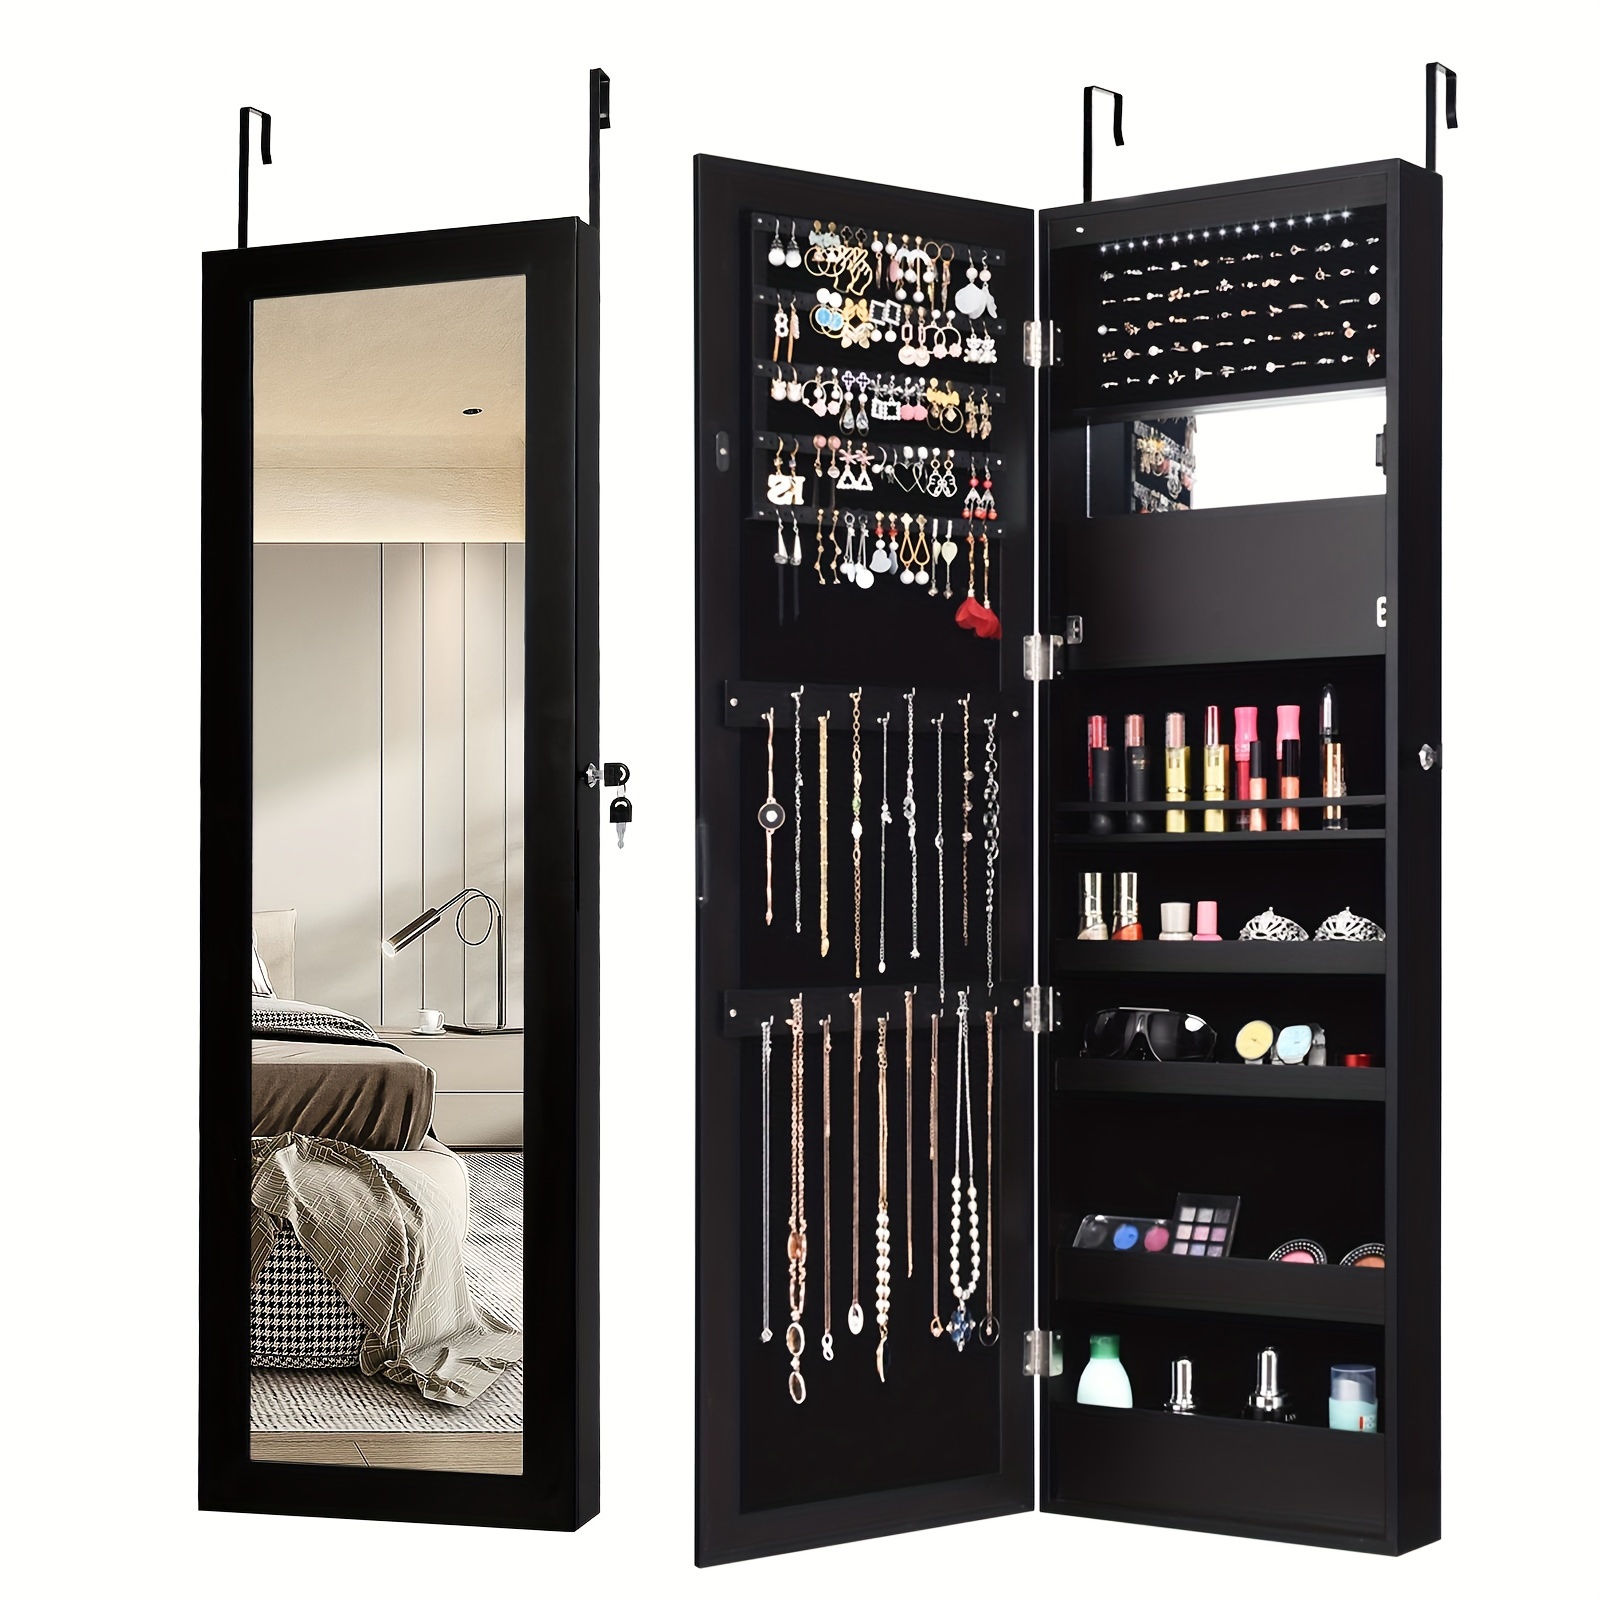 

Giantex Led Jewelry Cabinet Wall Door Mounted, Lockable Jewelry Armoire With Full Length Mirror, Cosmetics Tray, Brush Holders, Build-in Makeup Mirror, Jewelry Cabinet For Women Girls (black)